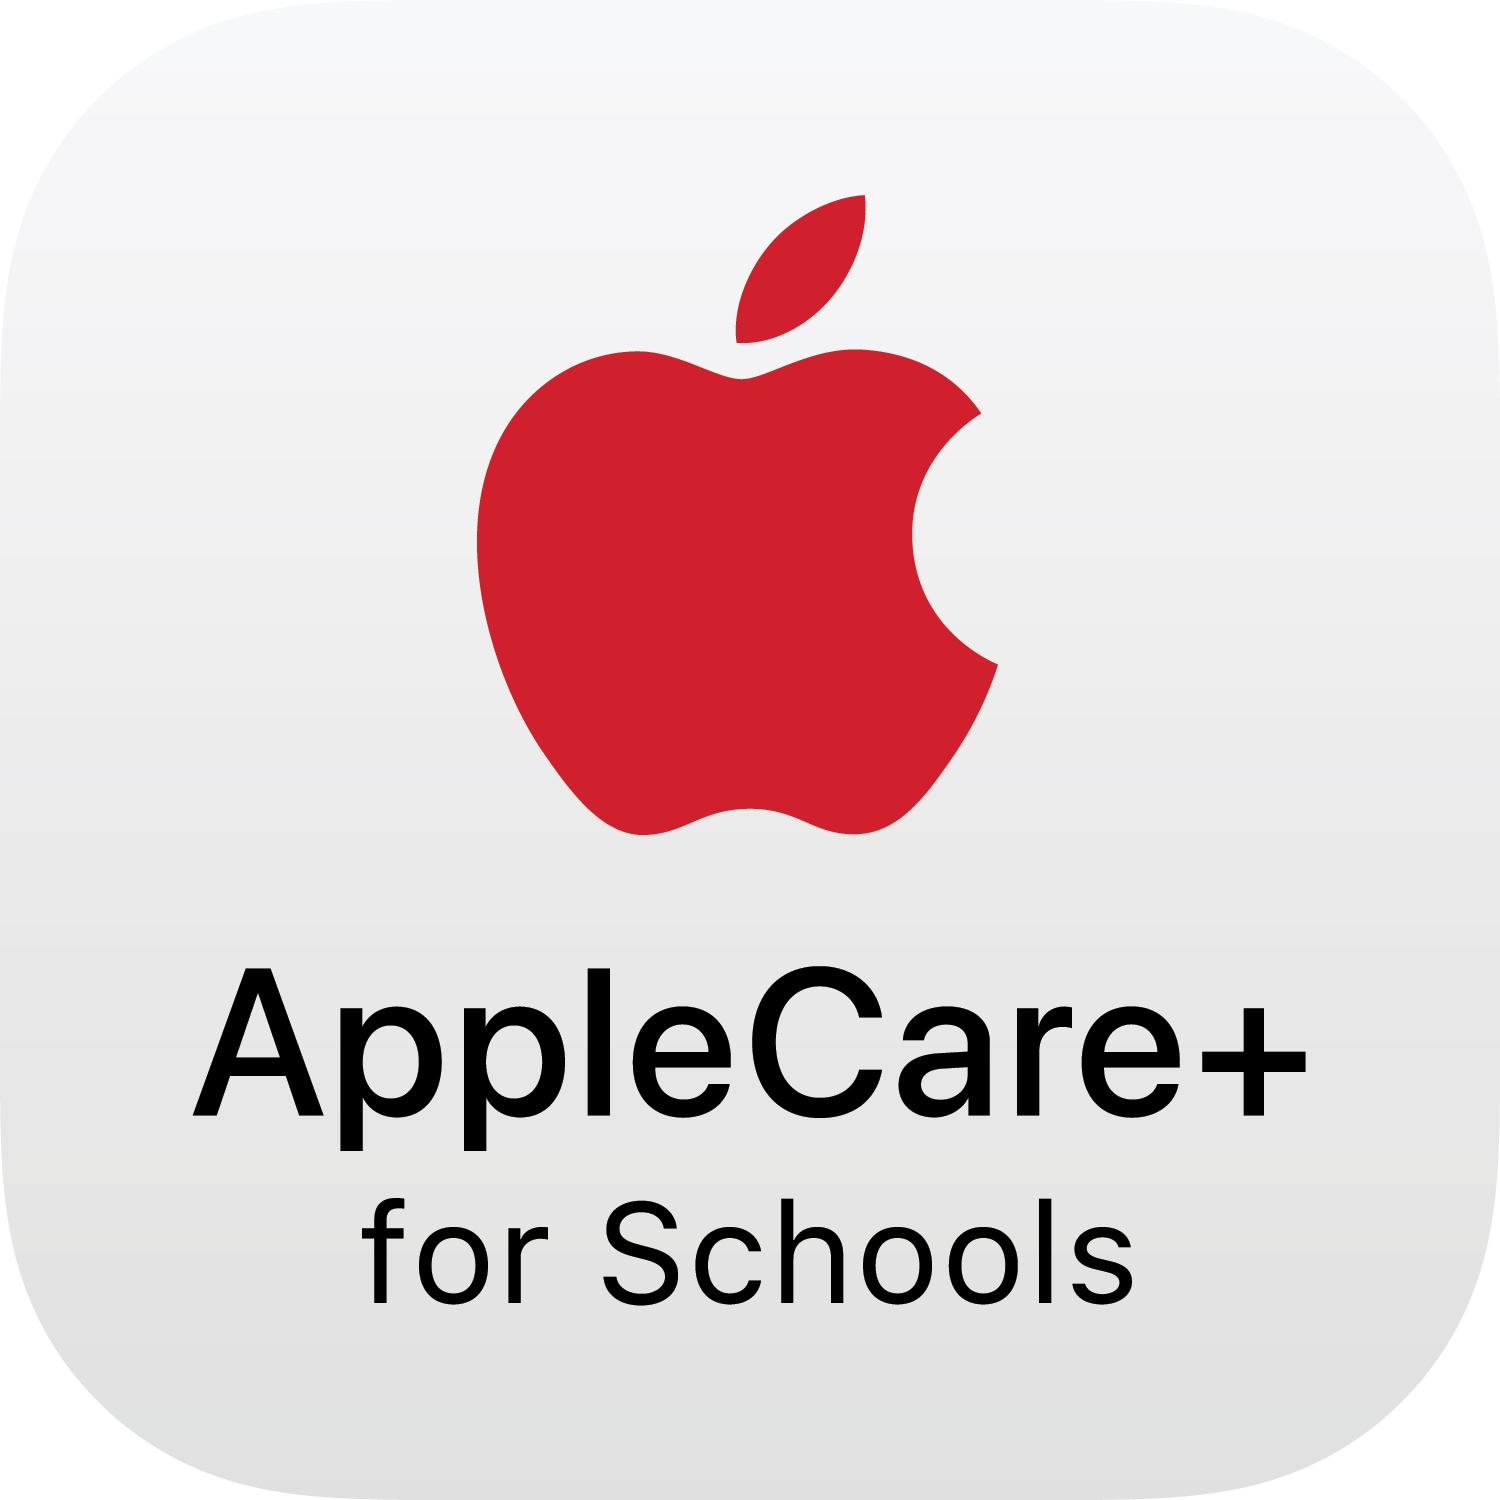 AppleCare+ for Schools - 4 YR - Extended Service Agreement - MacBook Pro 16